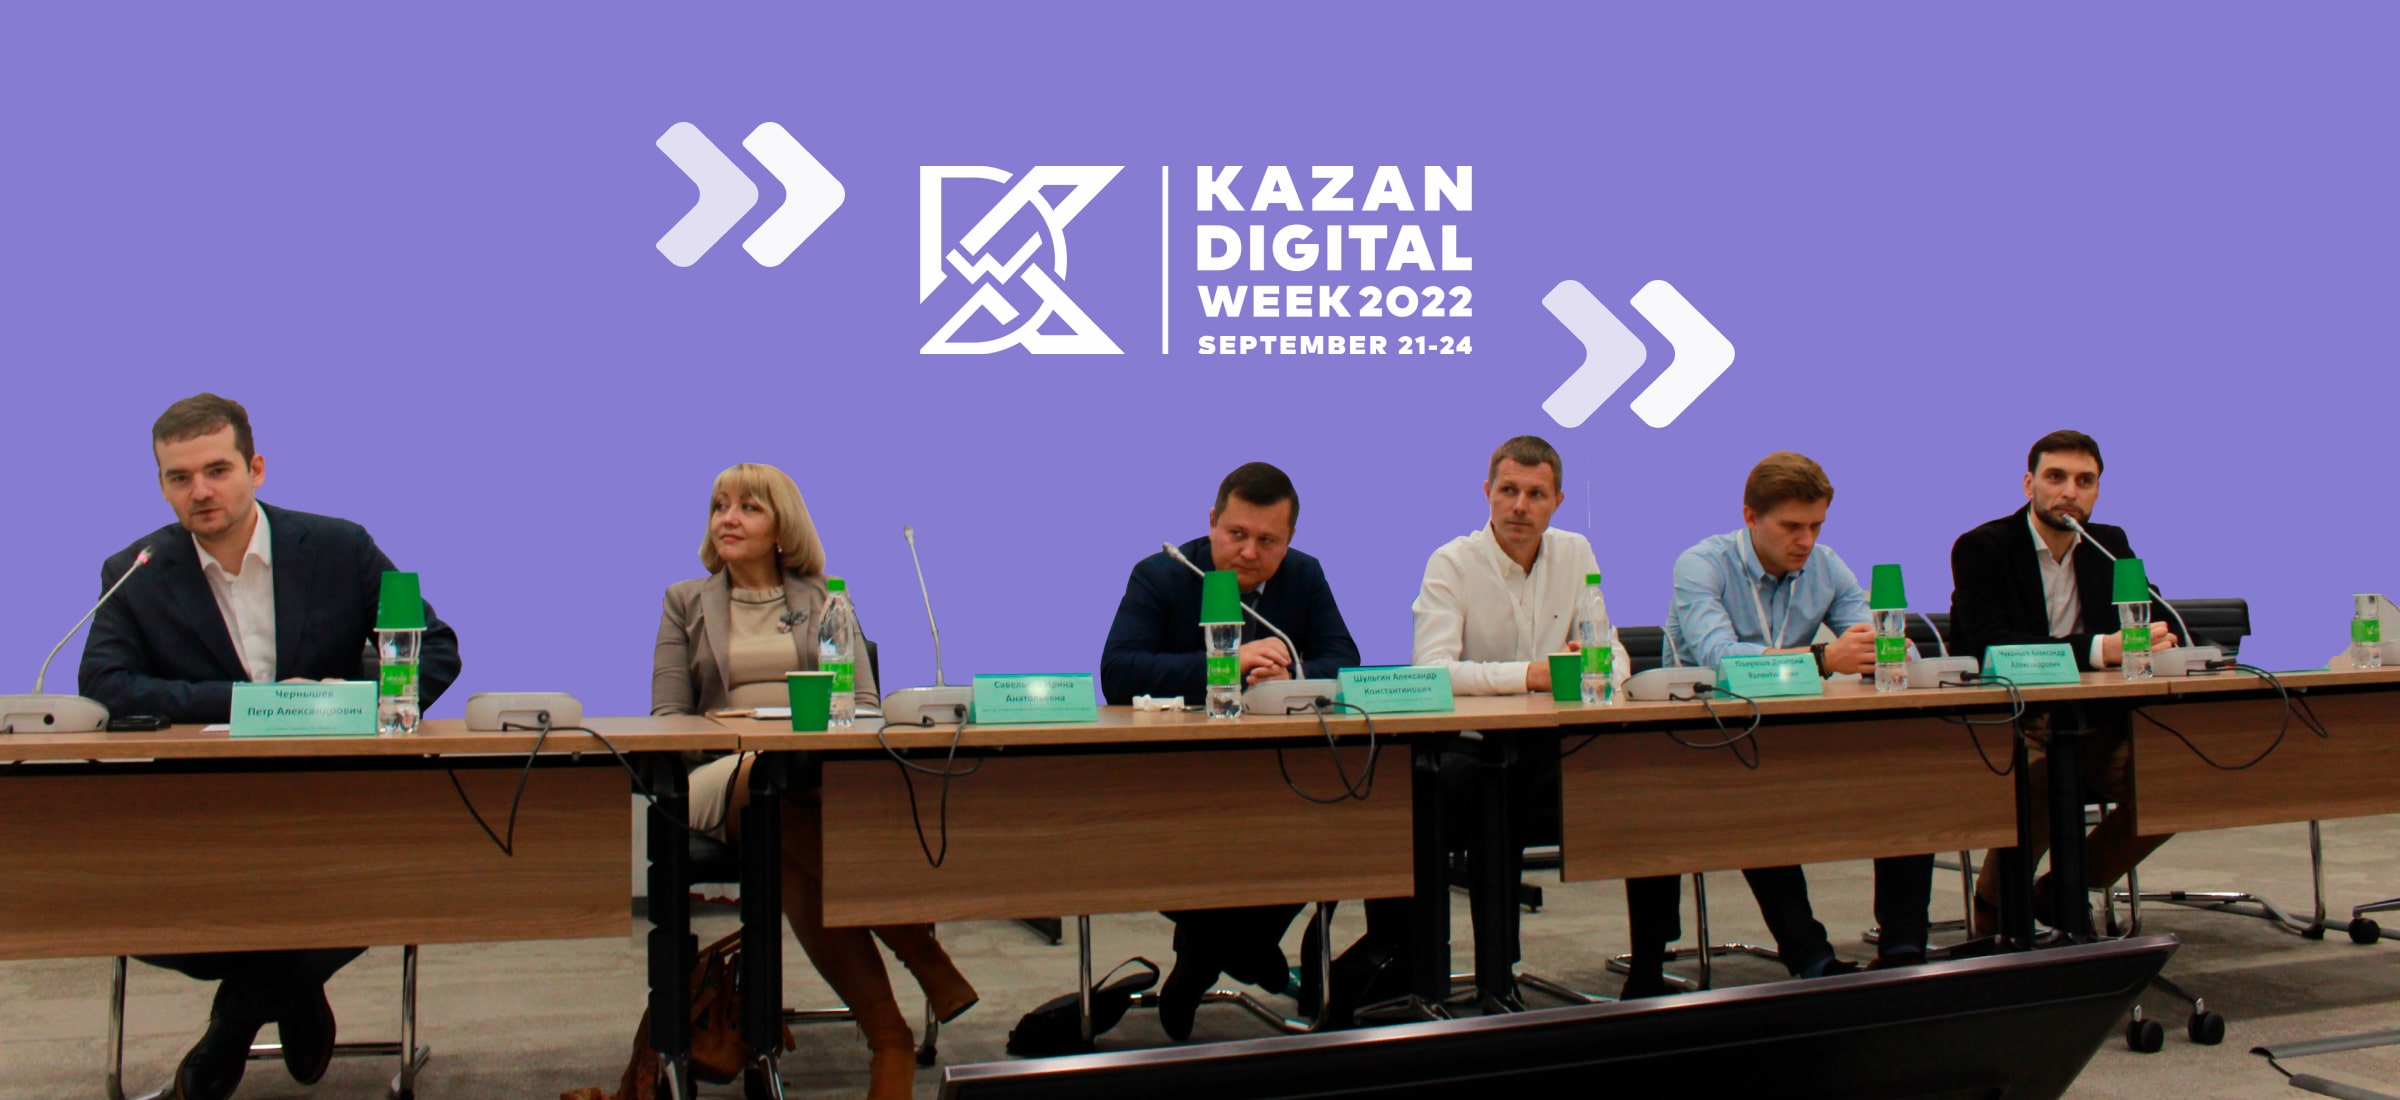 Friflex Group Held a Discussion Panel on Retail at the Kazan Digital Week Forum